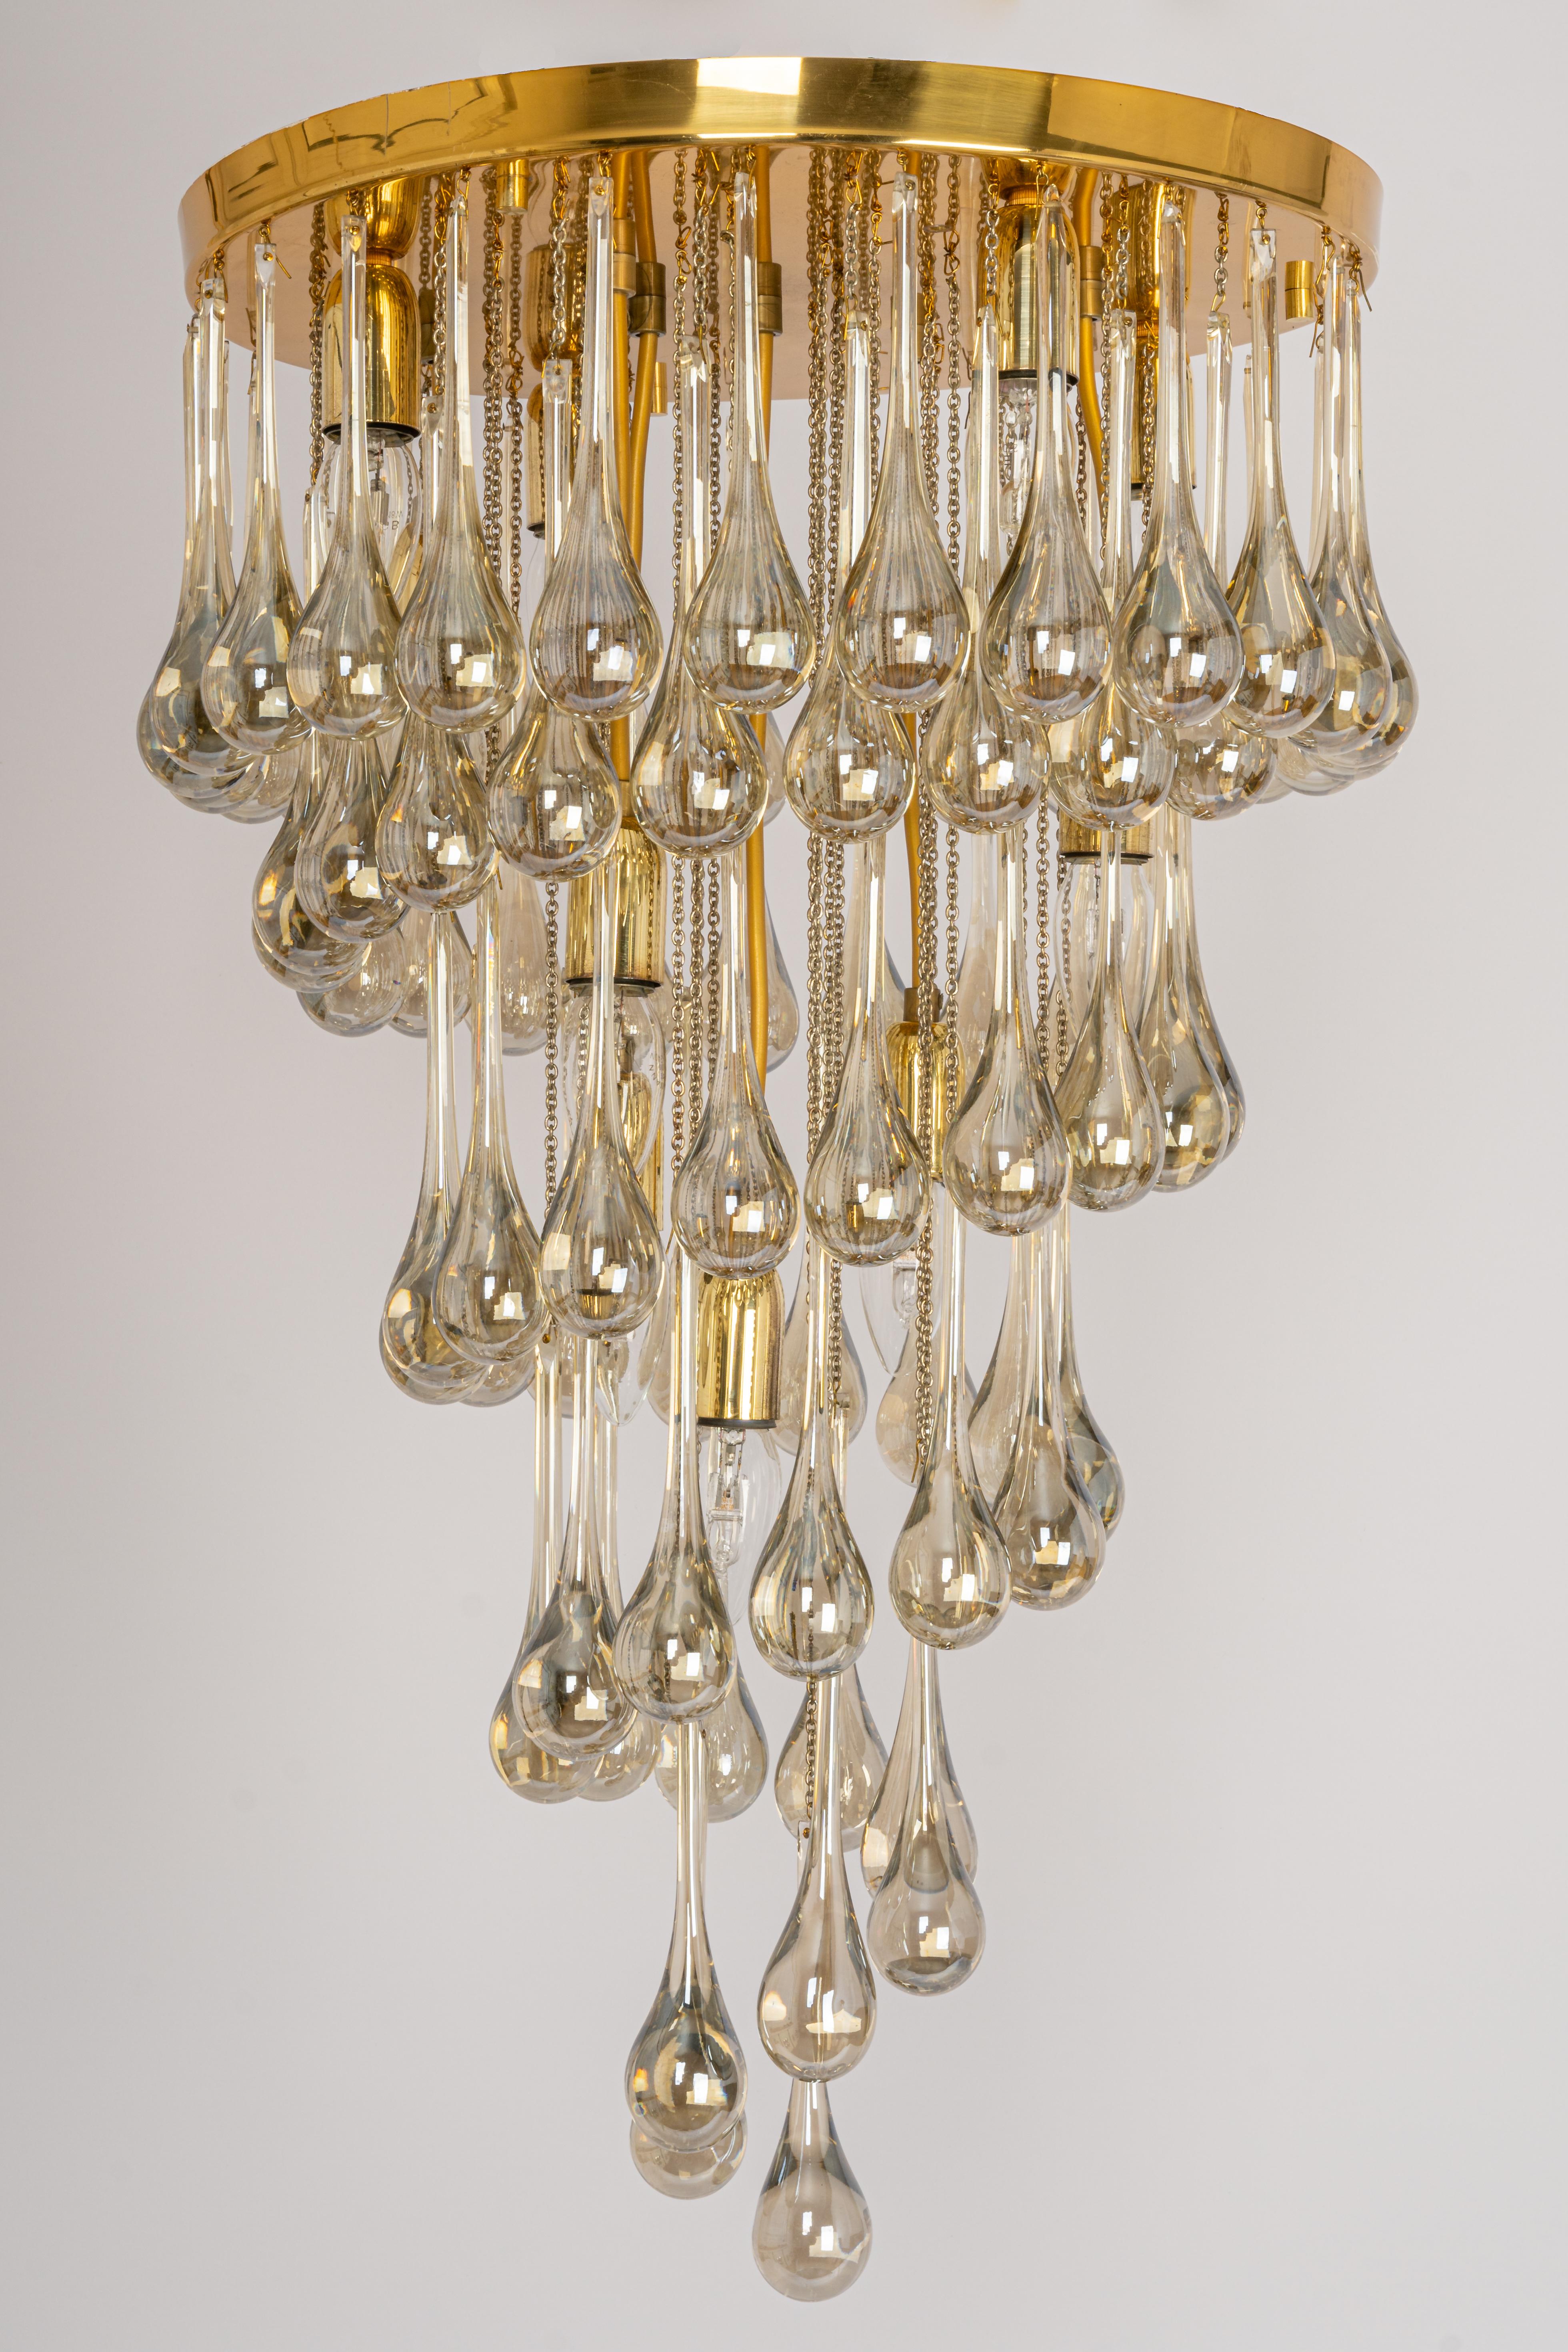 Stunning chandelier by Christoph Palme, Germany, manufactured in the 1970s. It’s composed of Murano teardrop glass pieces on a brass frame.

High quality and in a good condition. Cleaned, well-wired, and ready to use. 
There are 3 small tiny